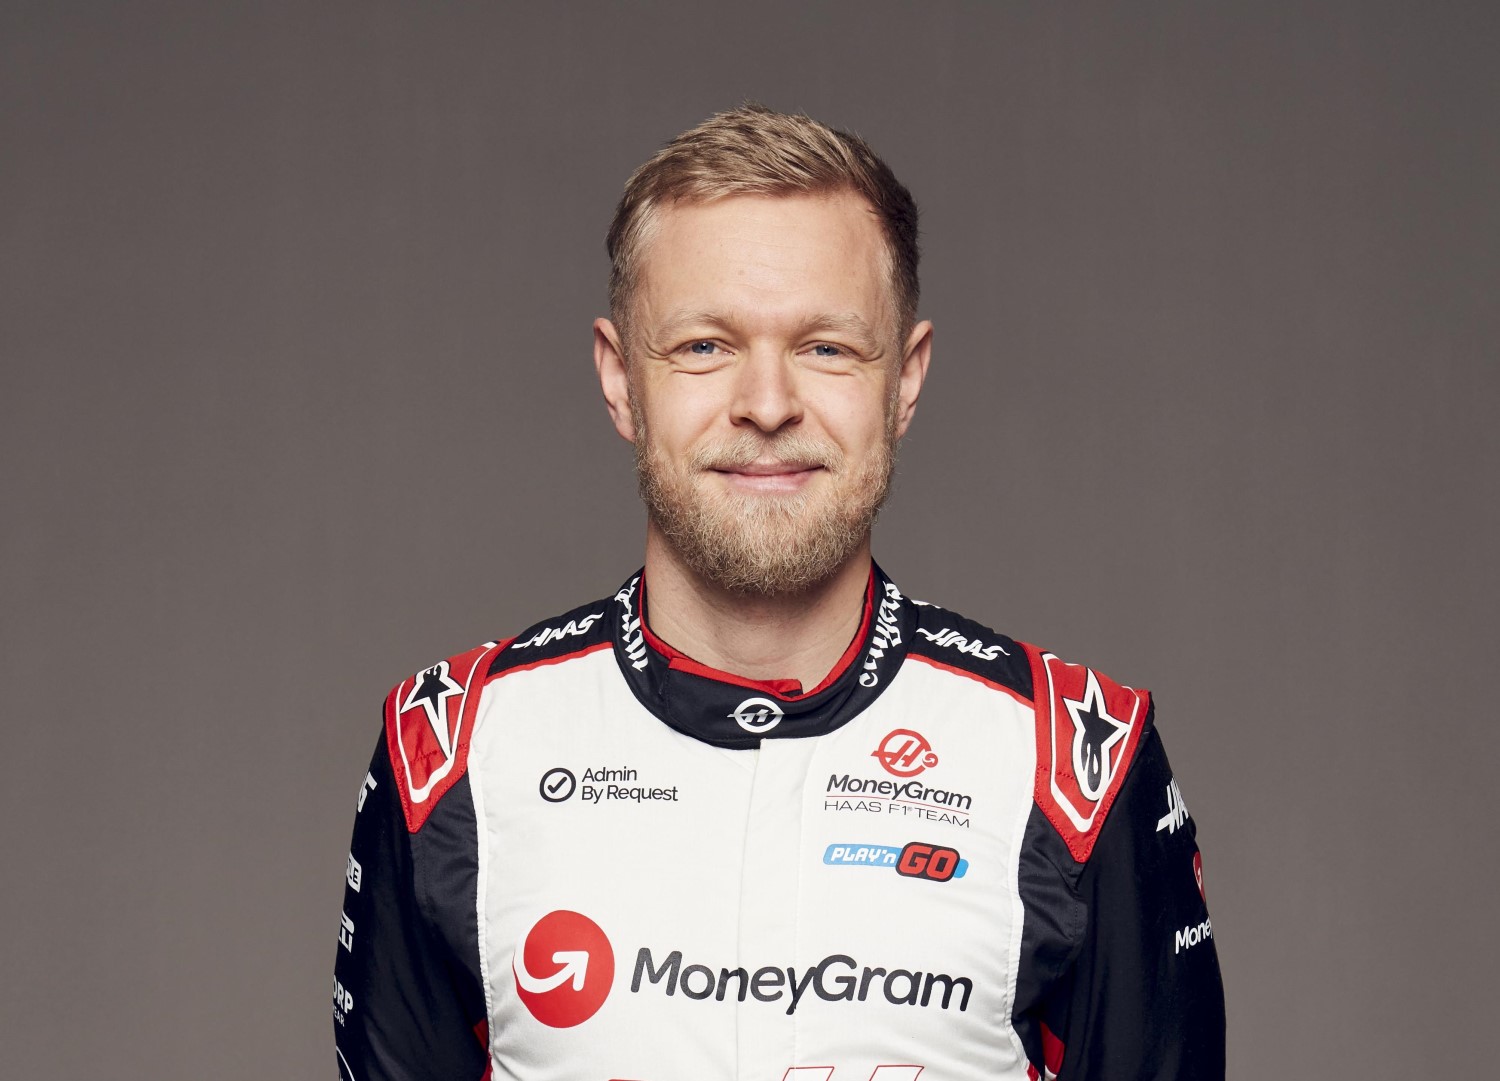 Haas F1 driver Kevin Magnussen